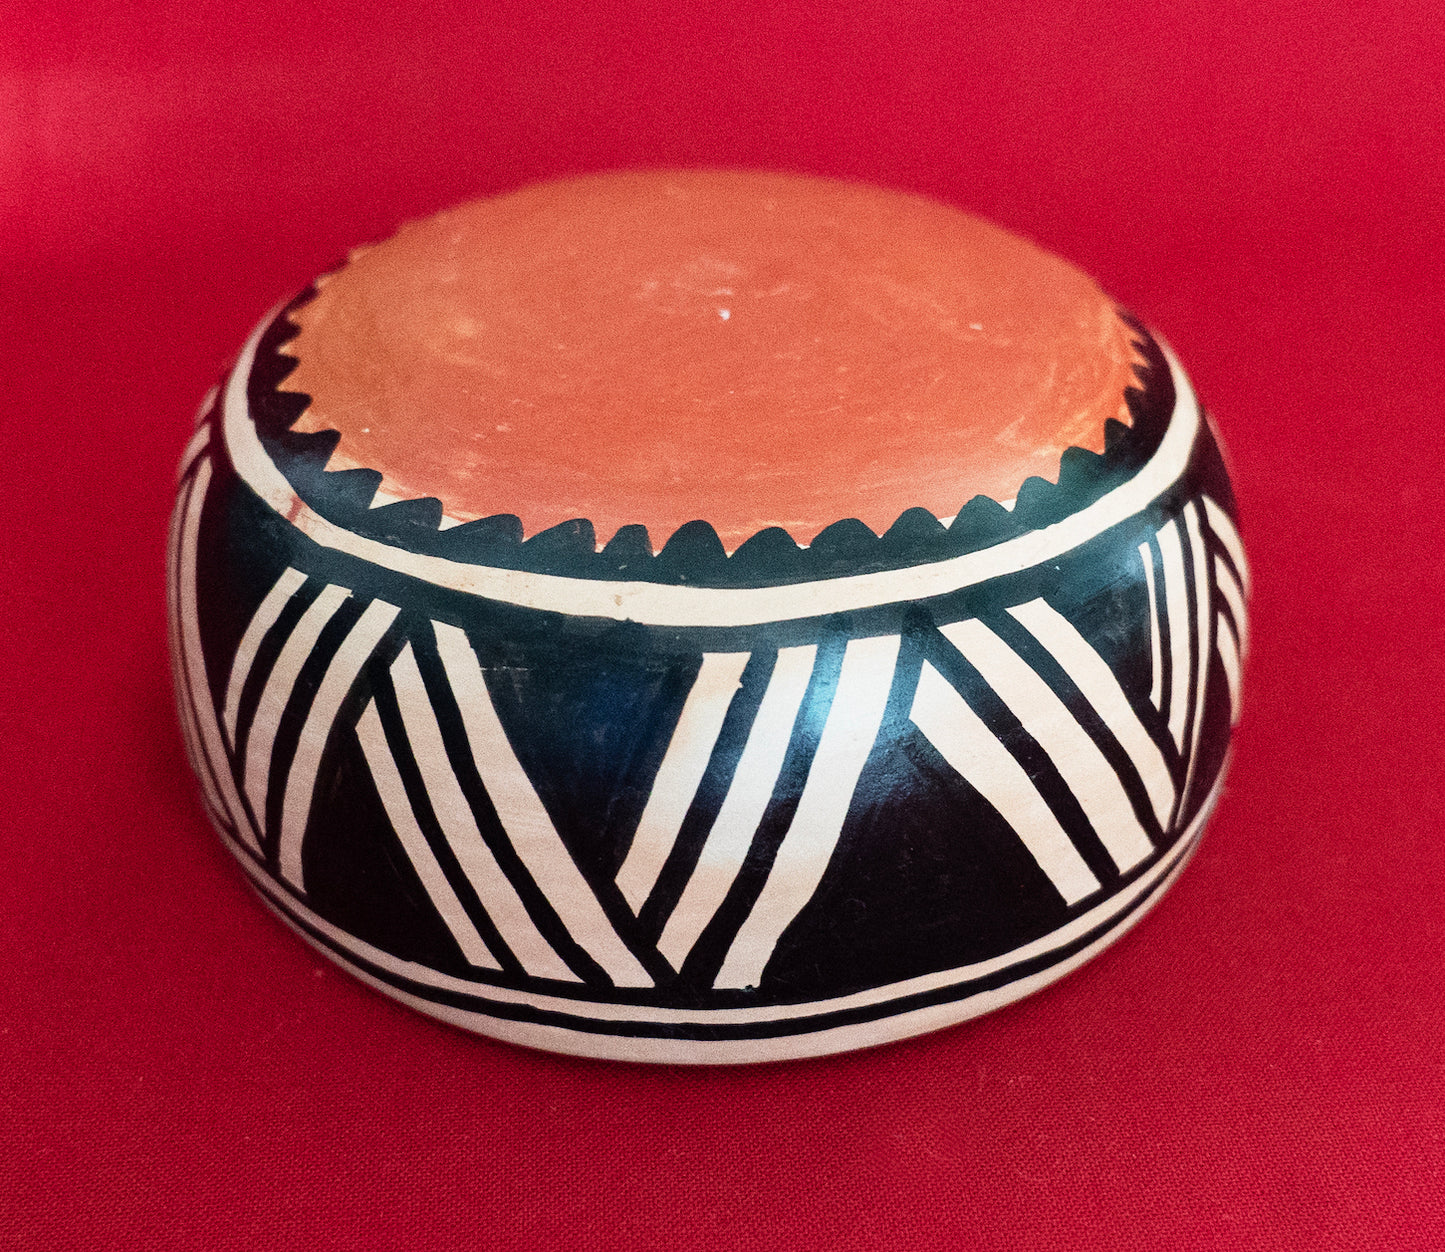 Small Bowl by Indigenous artisans of the Upper Xingu territory